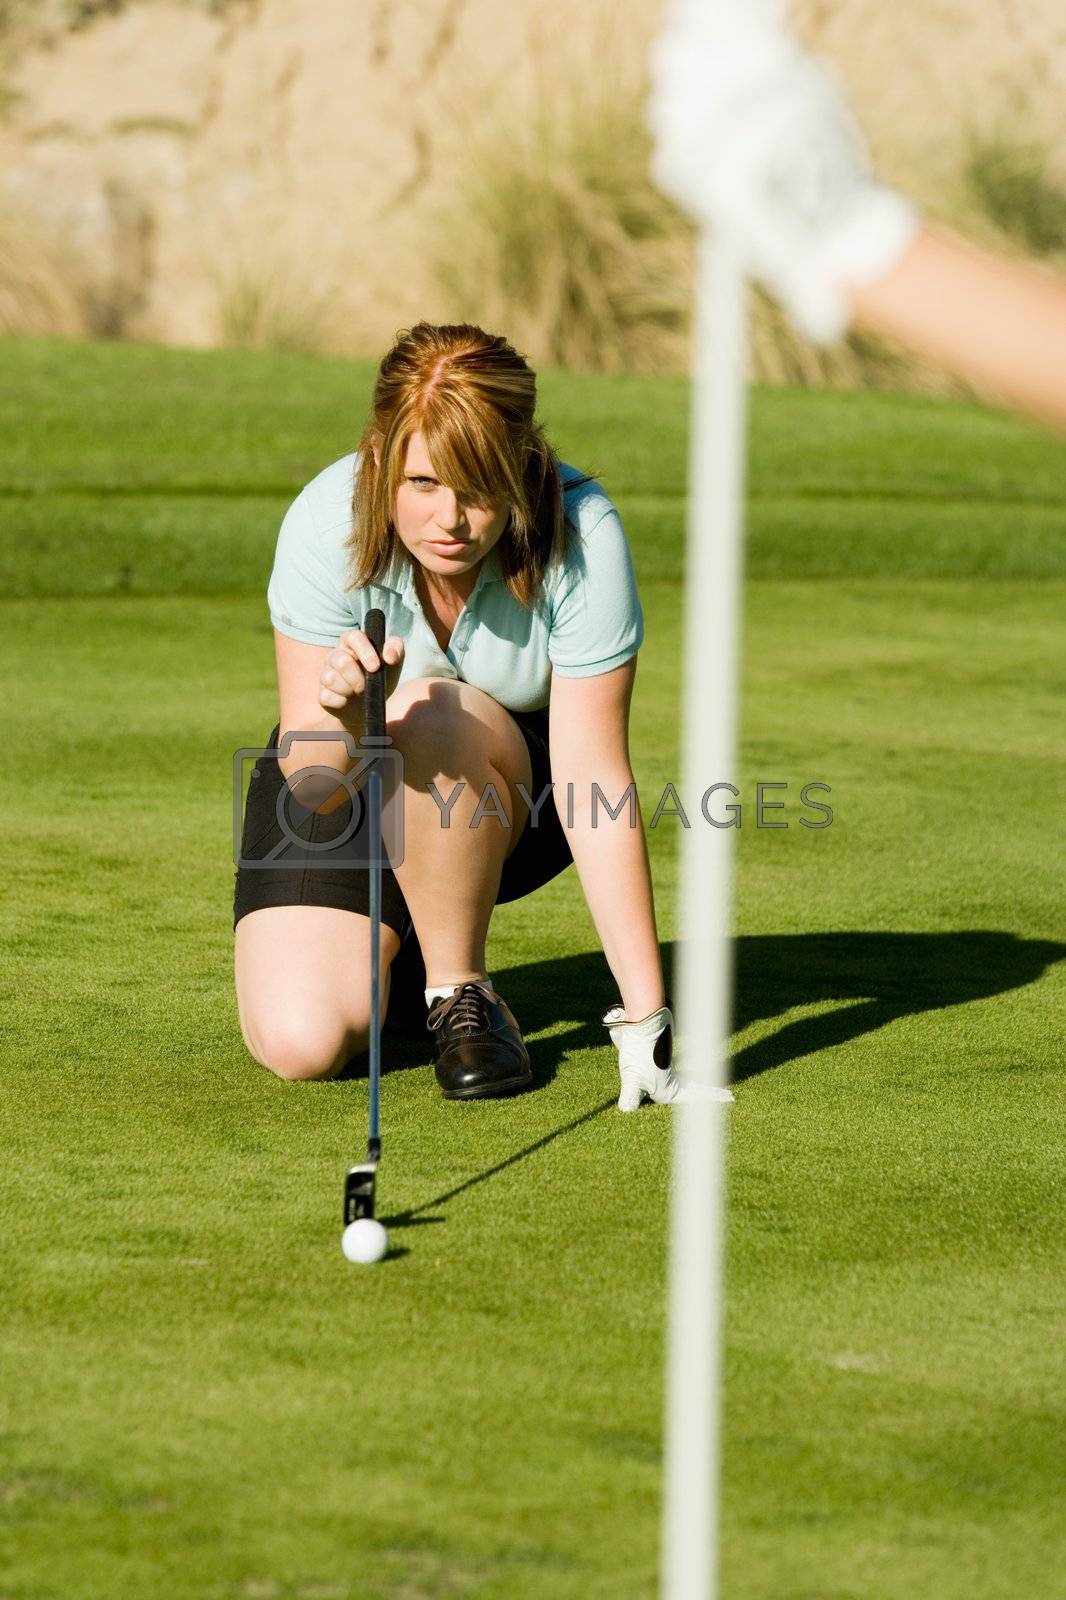 Royalty free image of Golfer Lining Up Putt on Putting Green by moodboard